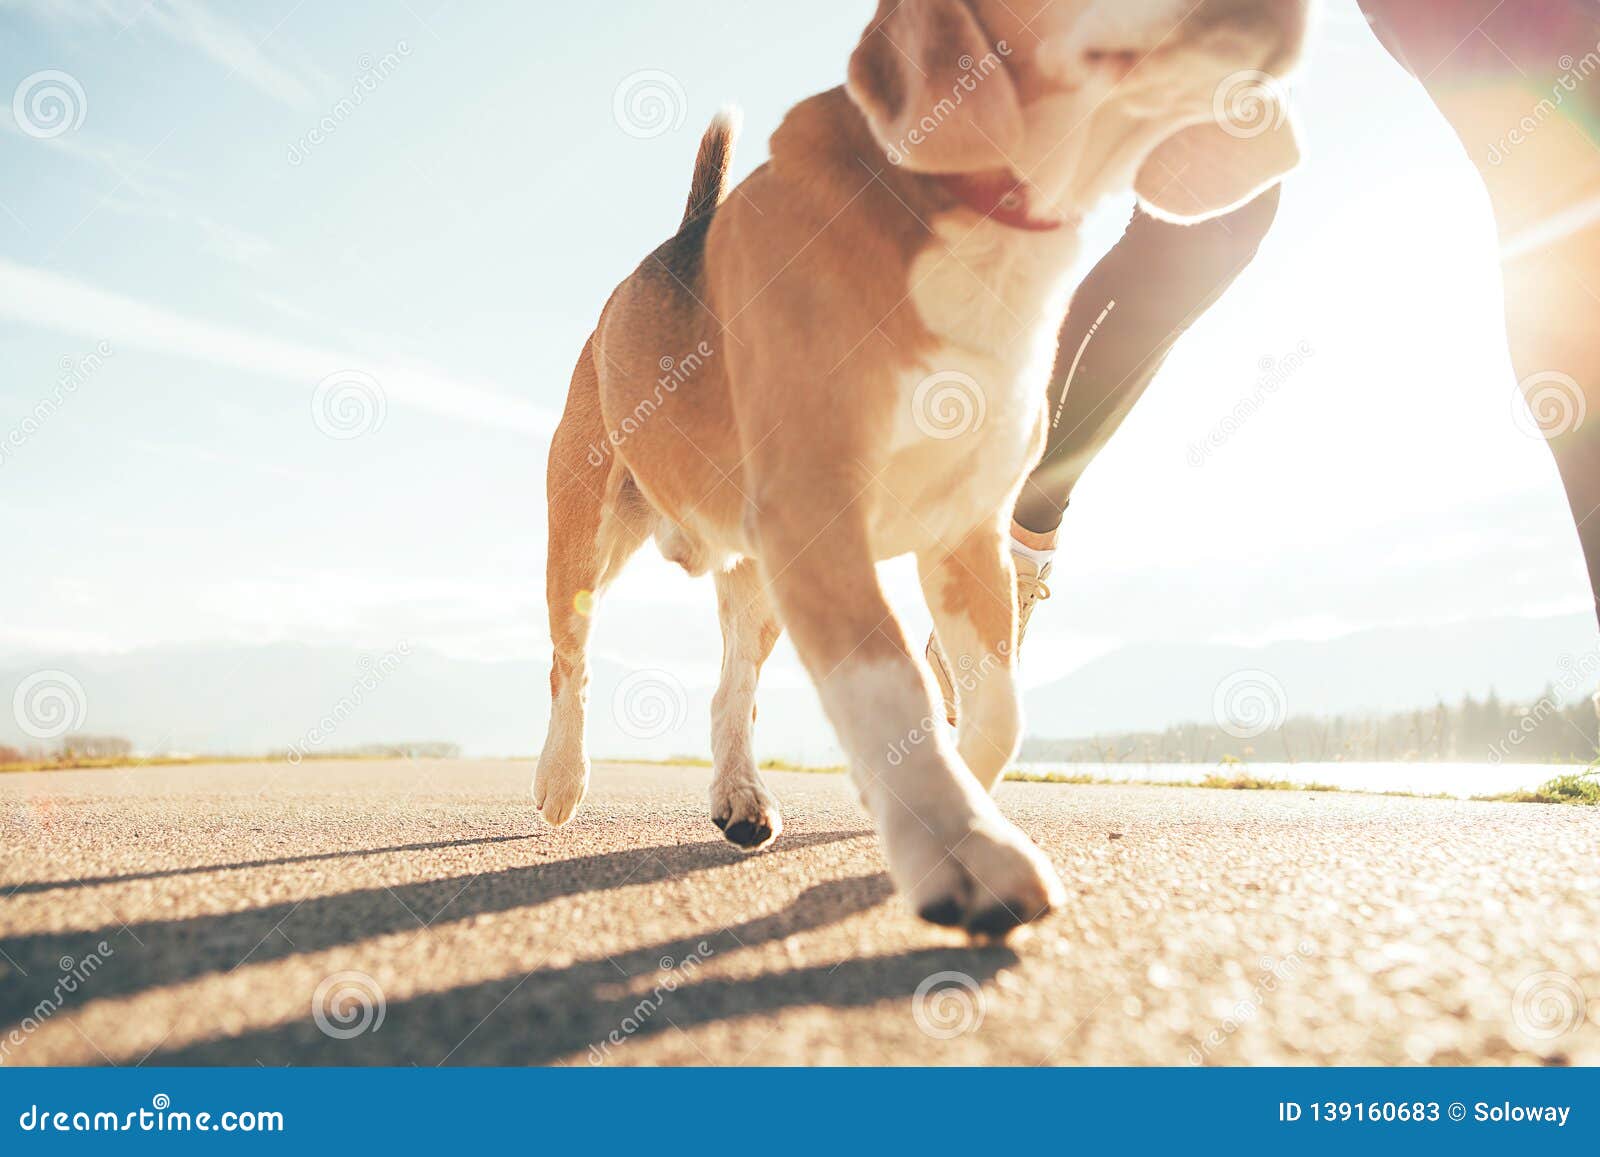 running dog paws and man legs close up image